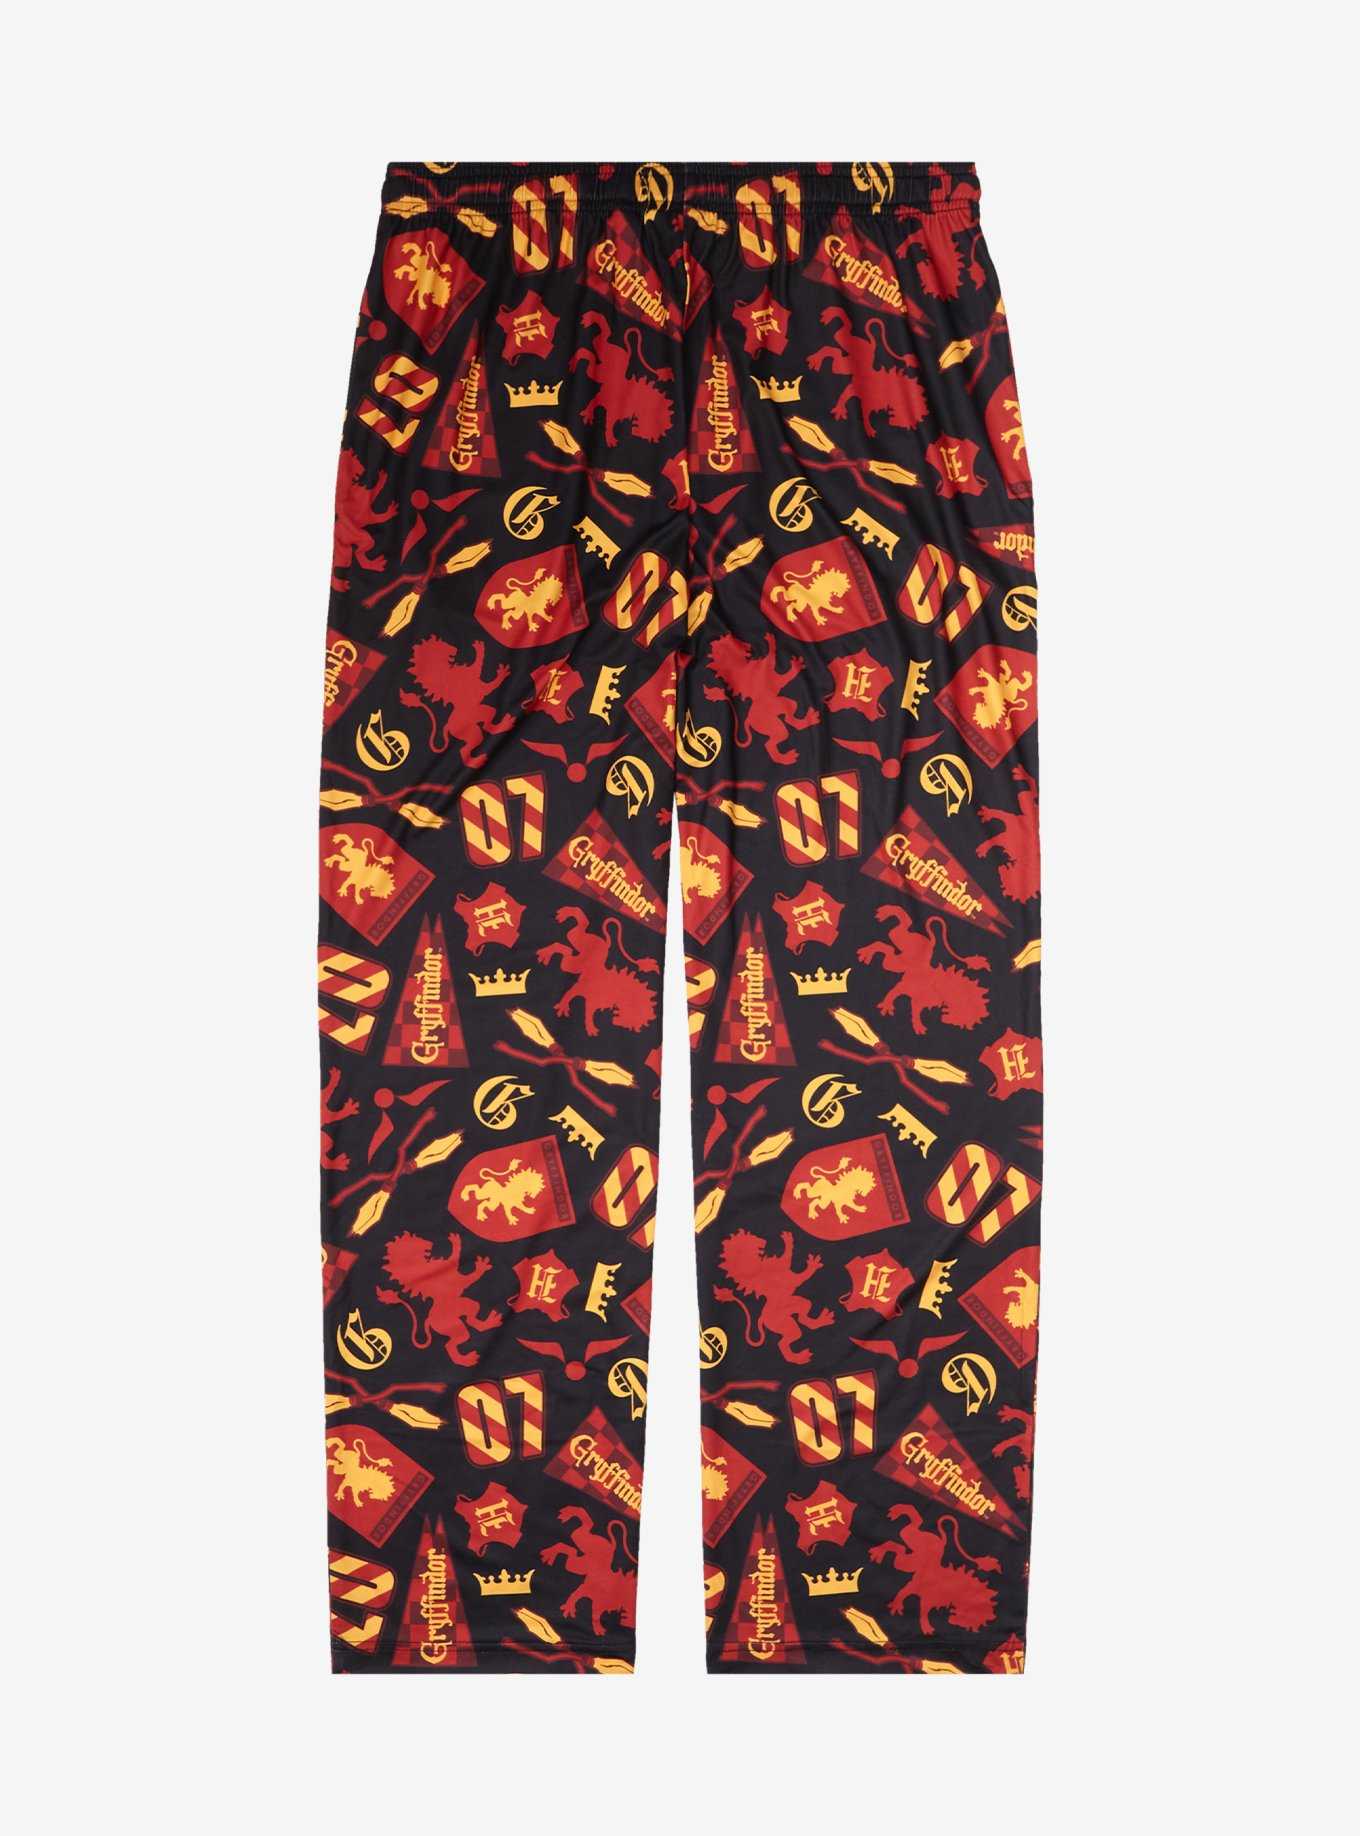 Harry Potter Gryffindor Quidditch Allover Print Plus Size Sleep Pants - BoxLunch Exclusive, , hi-res